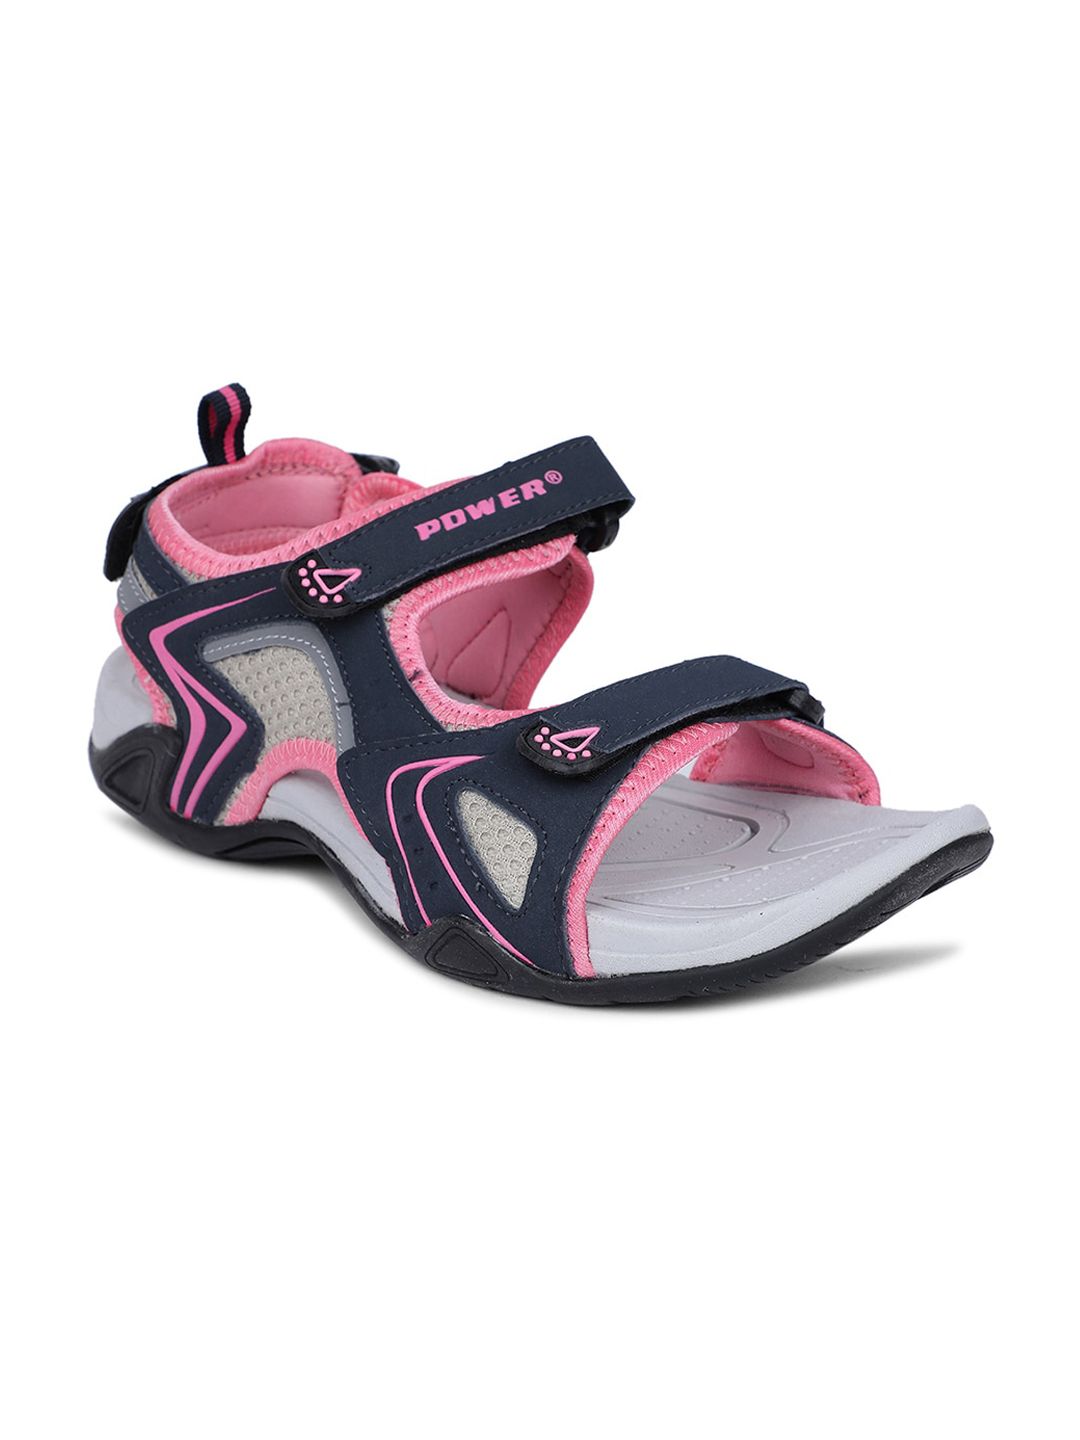 Power Women Pink Patterned Sports Sandals Price in India